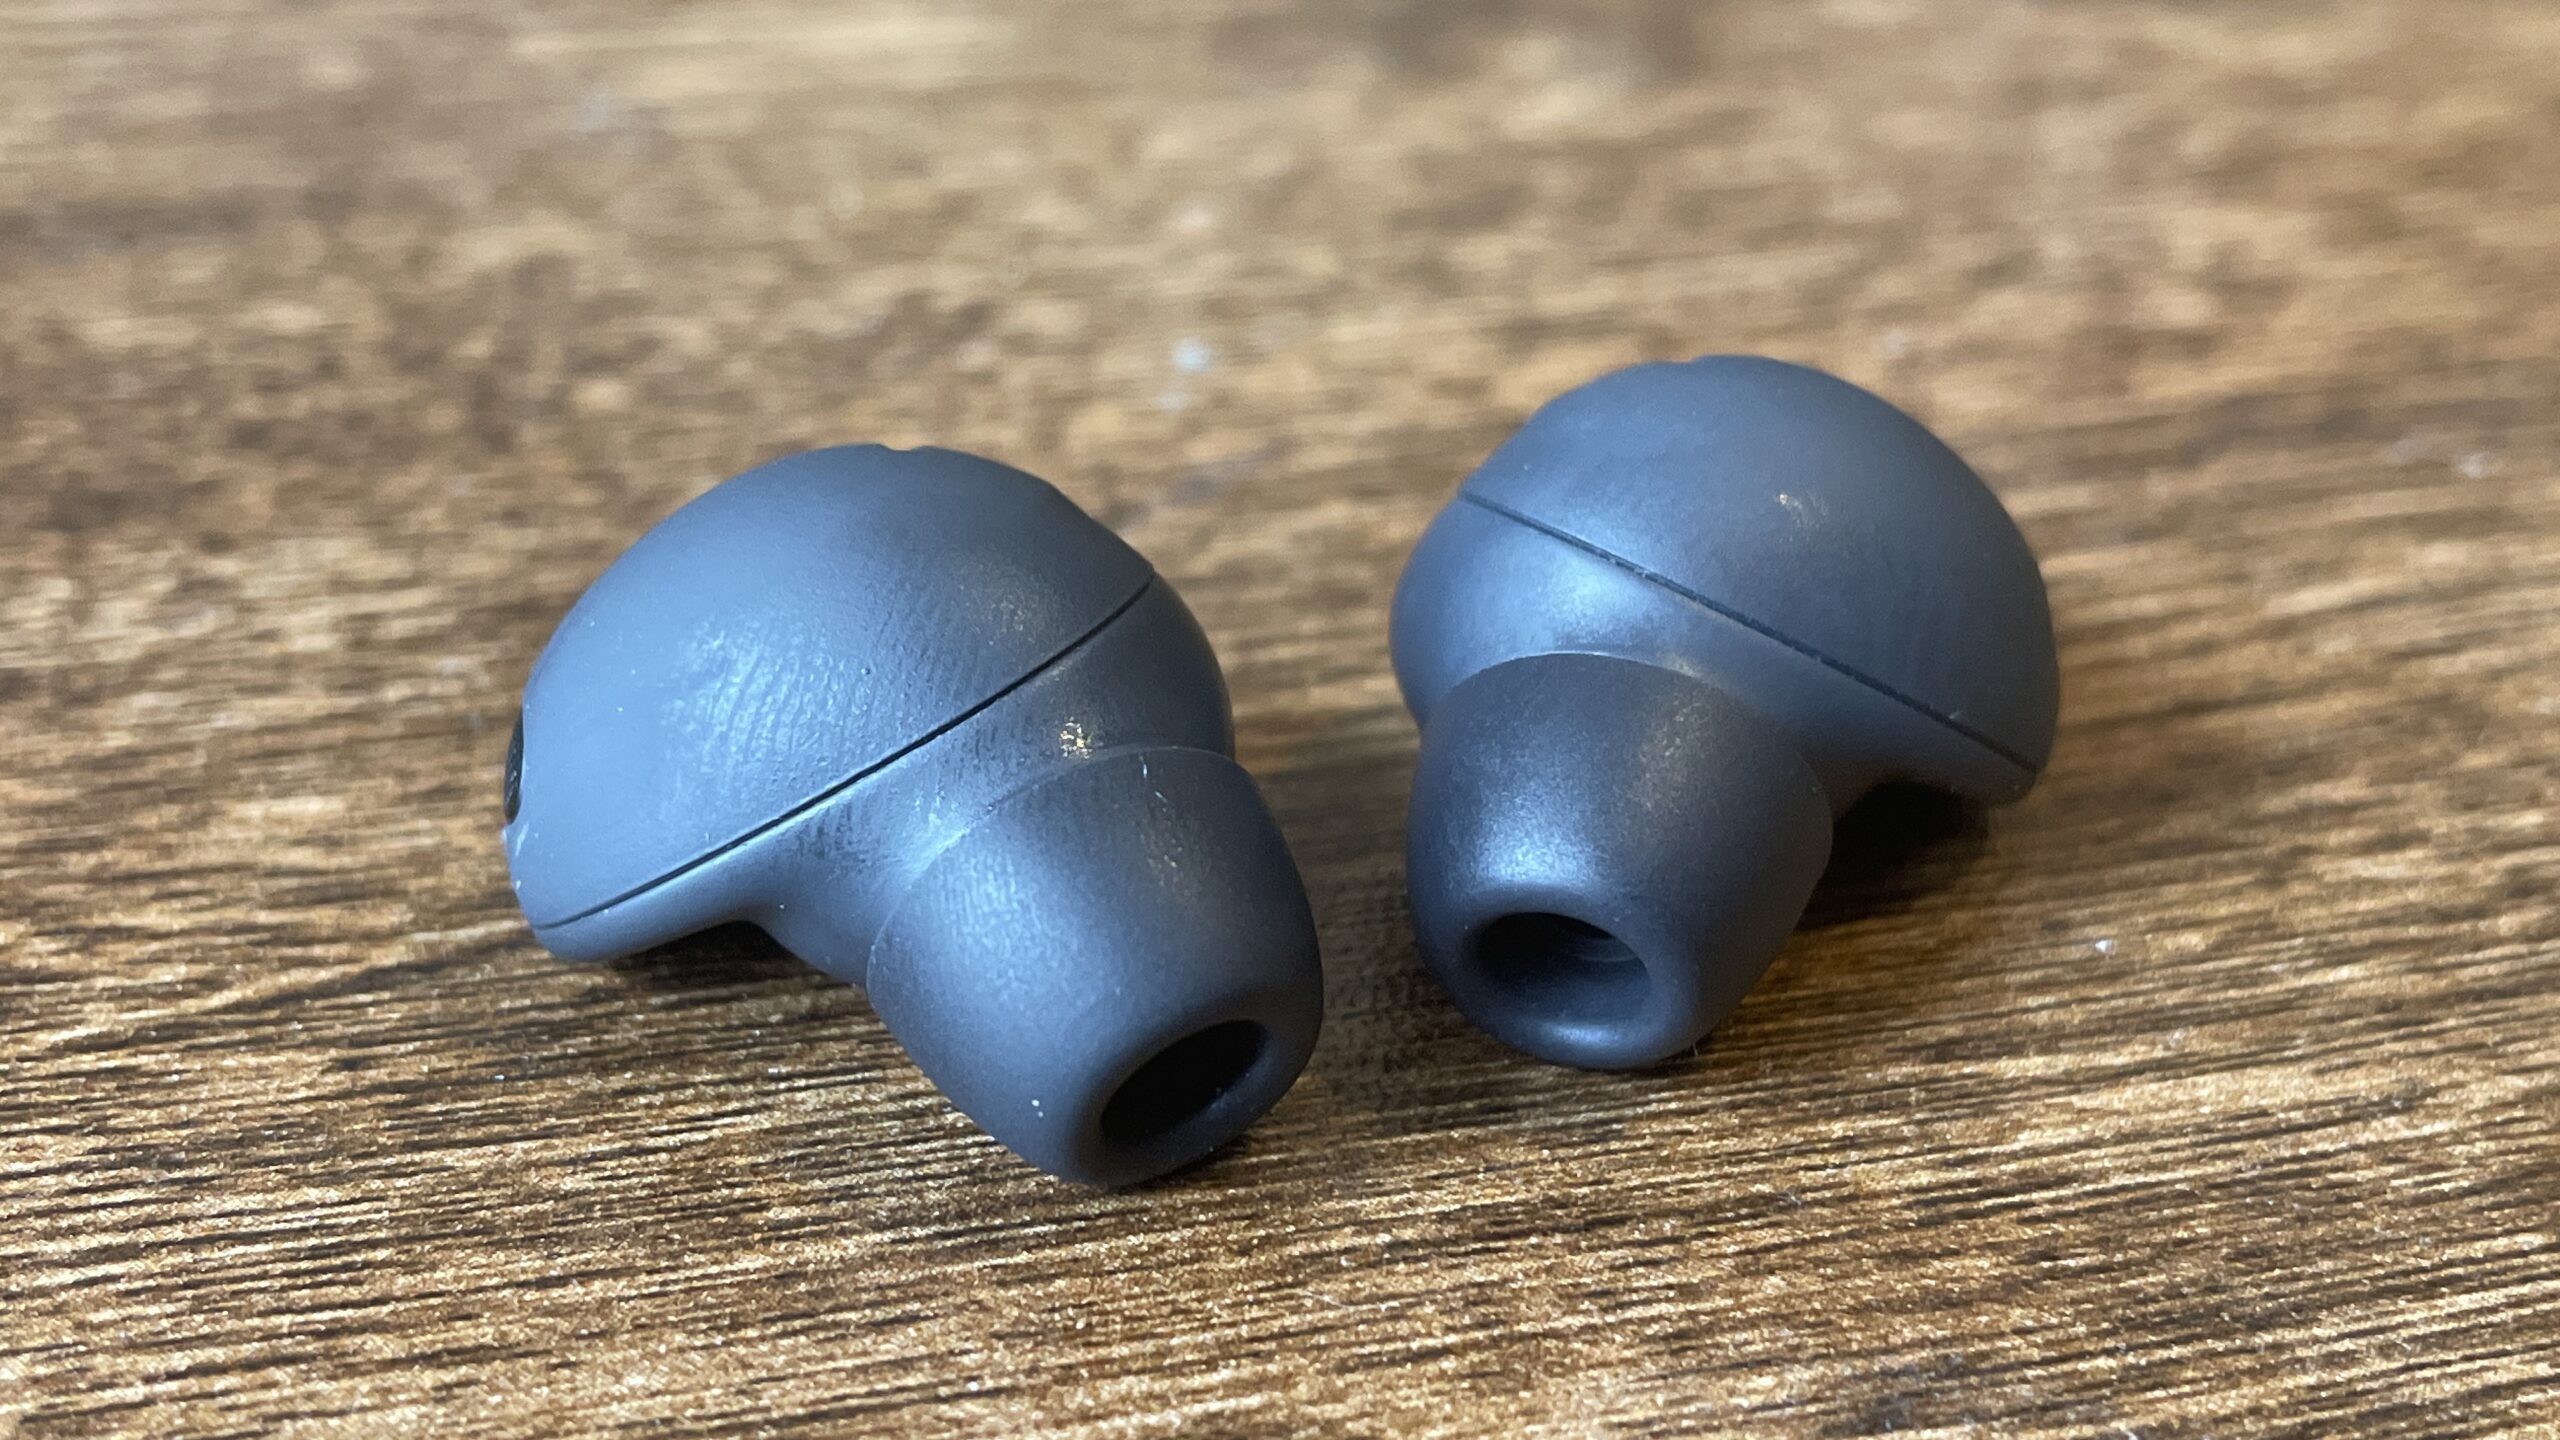 Samsung Galaxy Buds2 Pro earbuds review